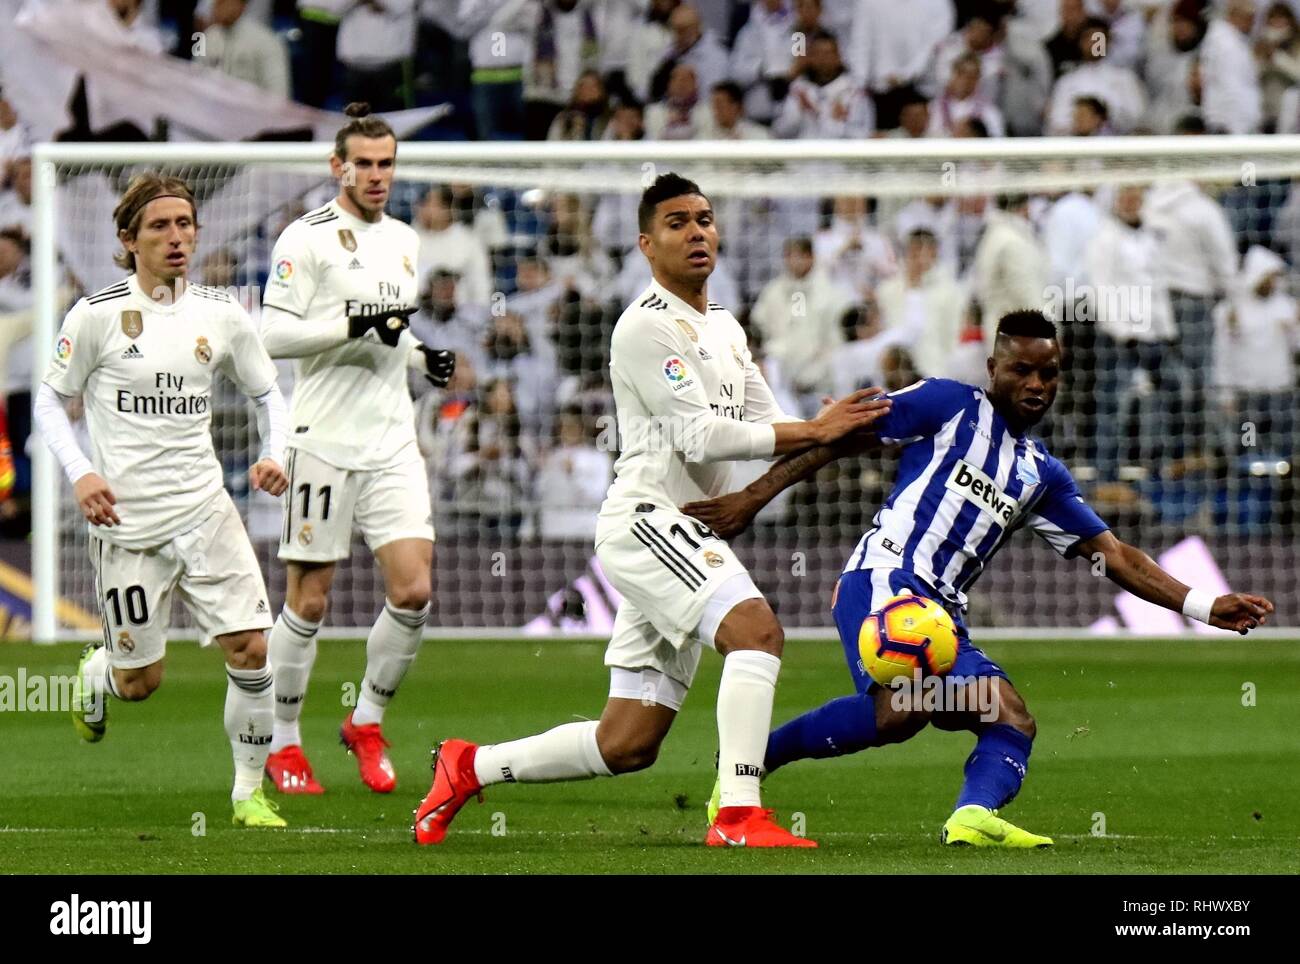 Madrid, Spain. 3rd Feb, 2019. Real Madrid's Casemiro (2nd R) competes with Alaves' Wakaso Mubarak (1st R) during a Spanish La Liga match between Real Madrid and Alaves in Madrid, Spain, on Feb. 3, 2019. Real Madrid won 3-0. Credit: Edward F. Peters/Xinhua/Alamy Live News Stock Photo